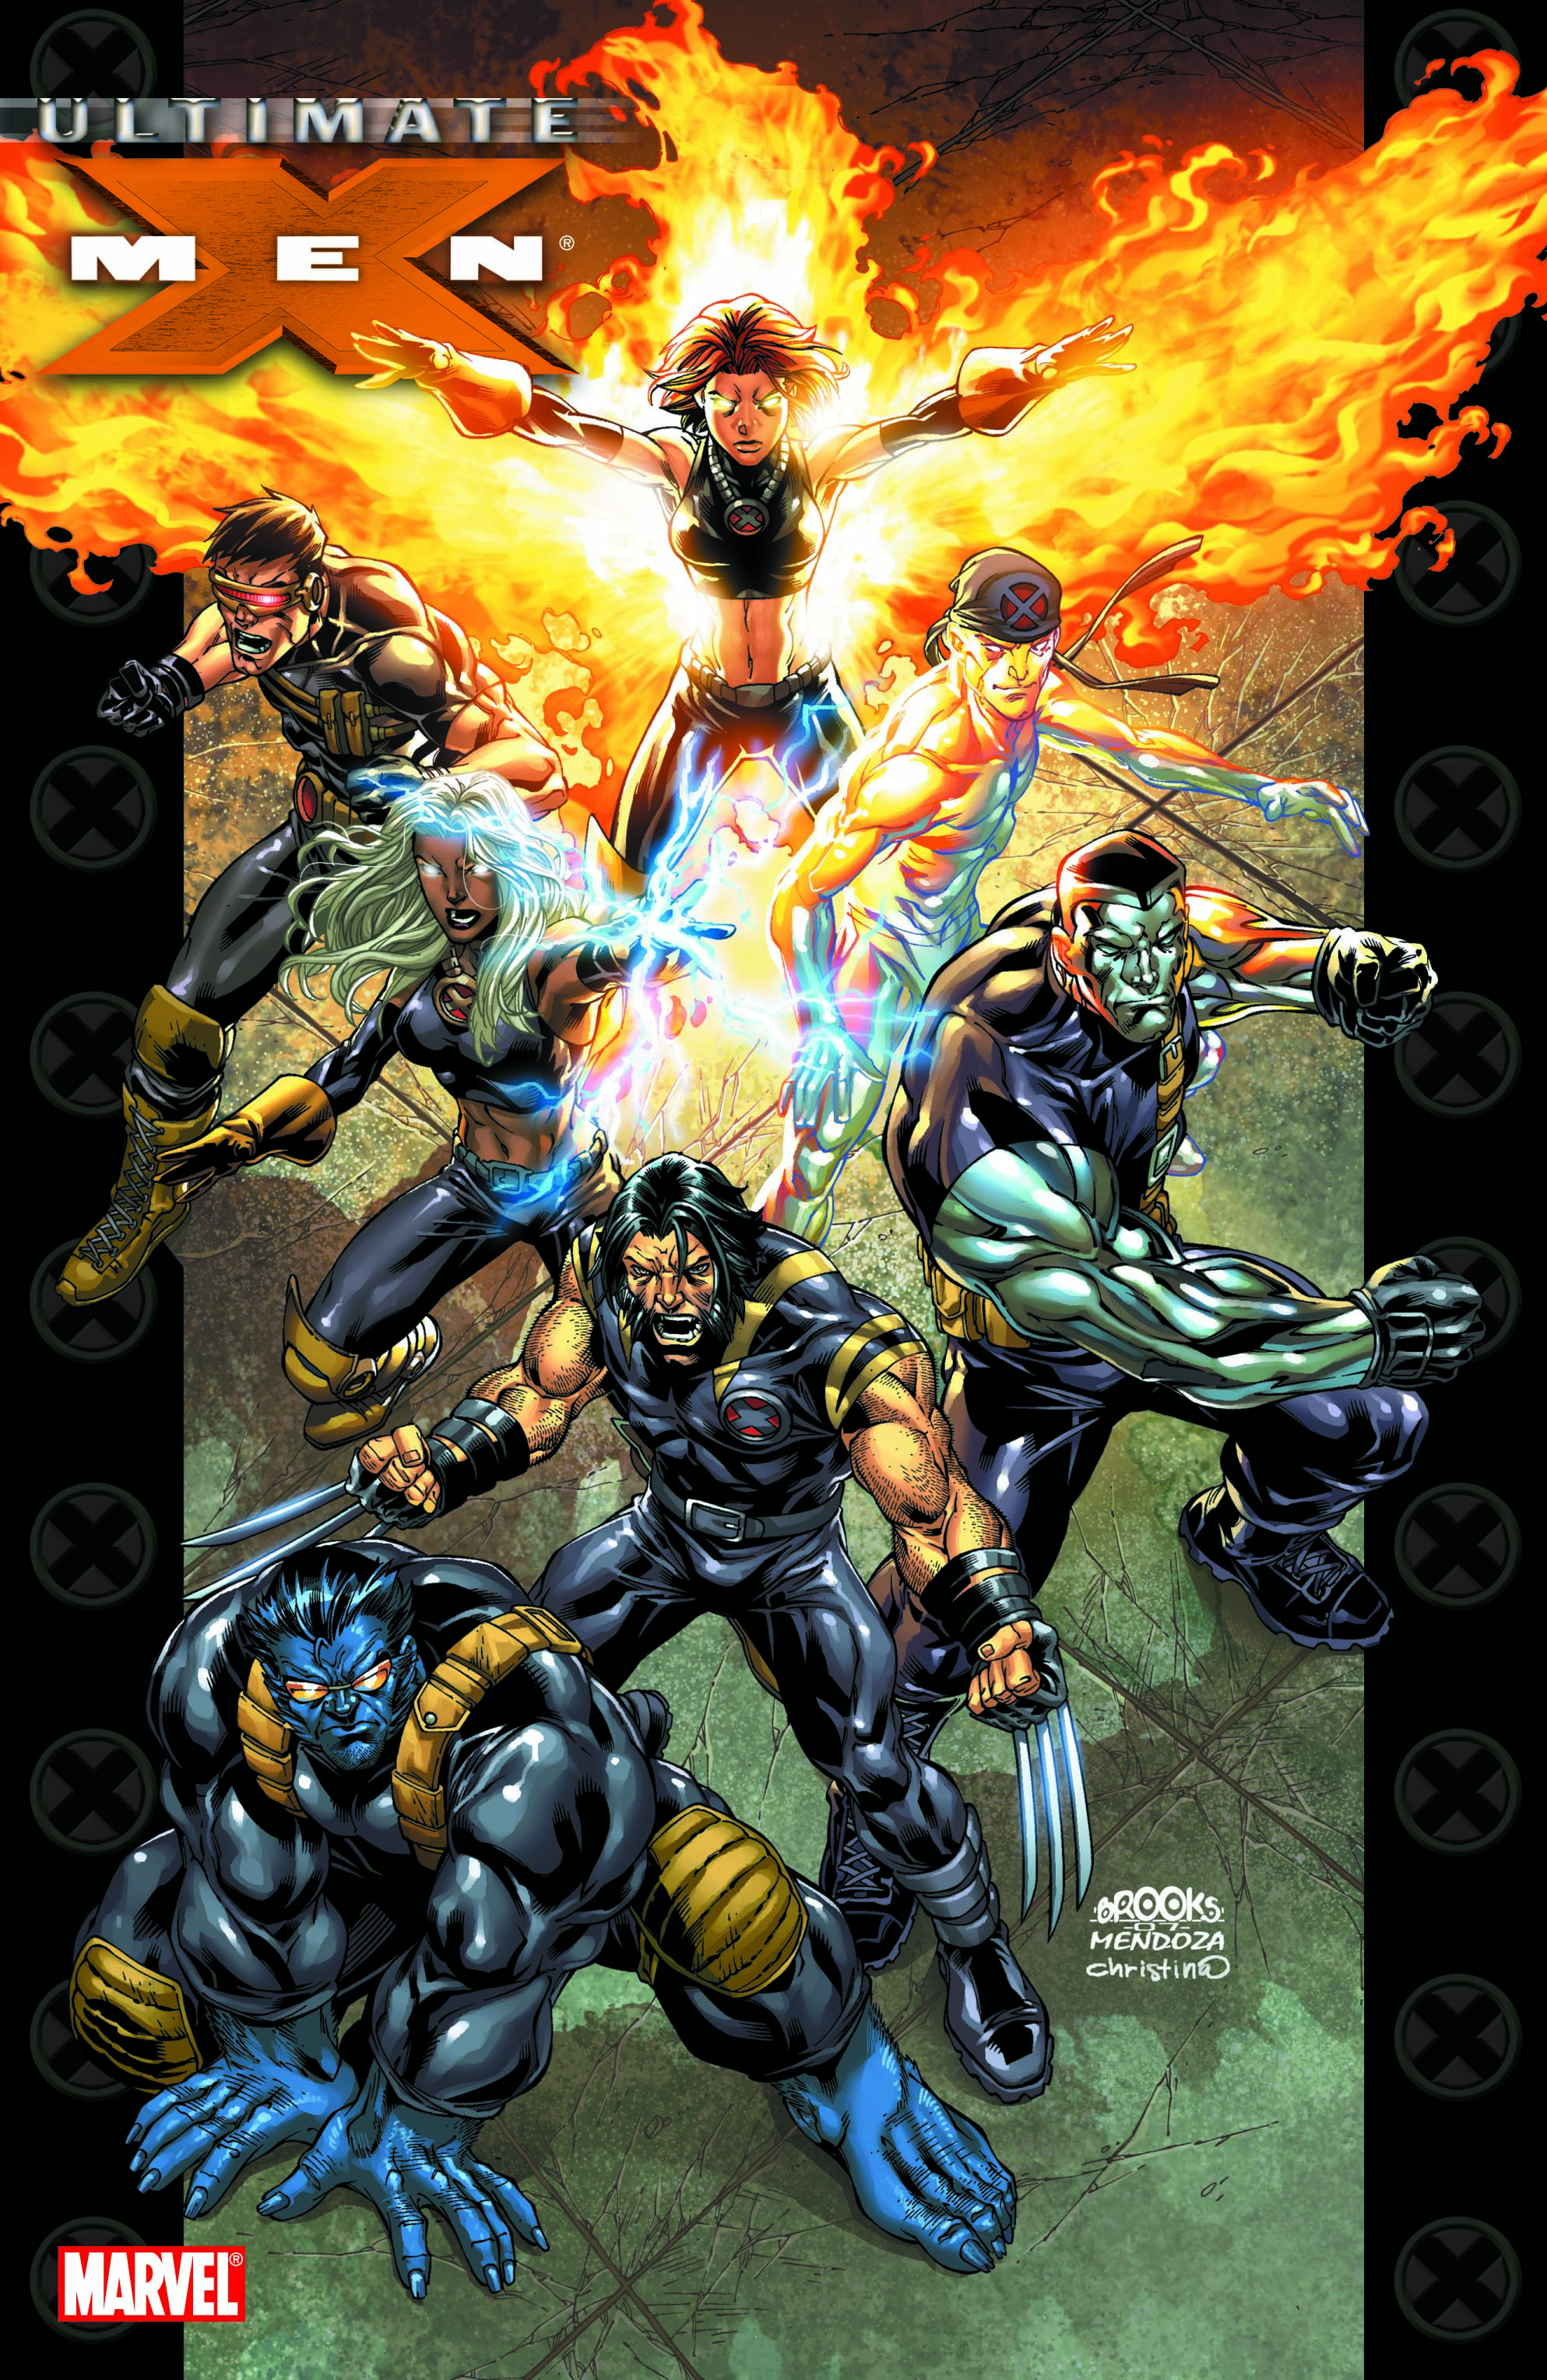 ULTIMATE X-MEN ULTIMATE COLLECTION BOOK 2 TPB (Trade Paperback)